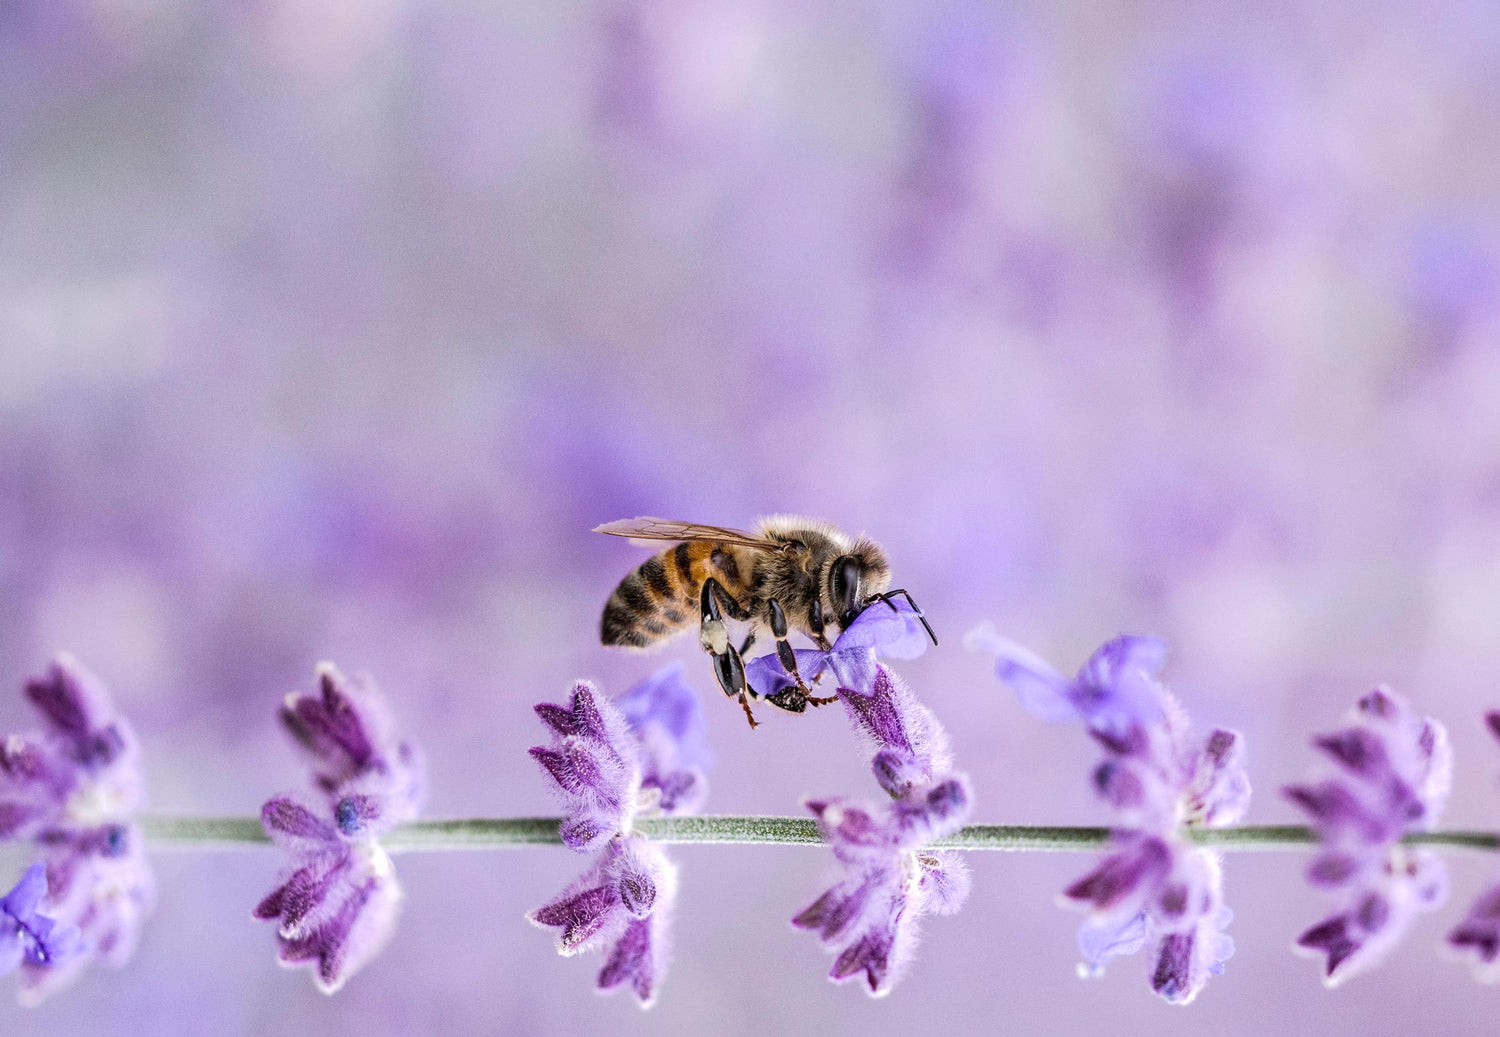 A honey bee pollinating lavender plants